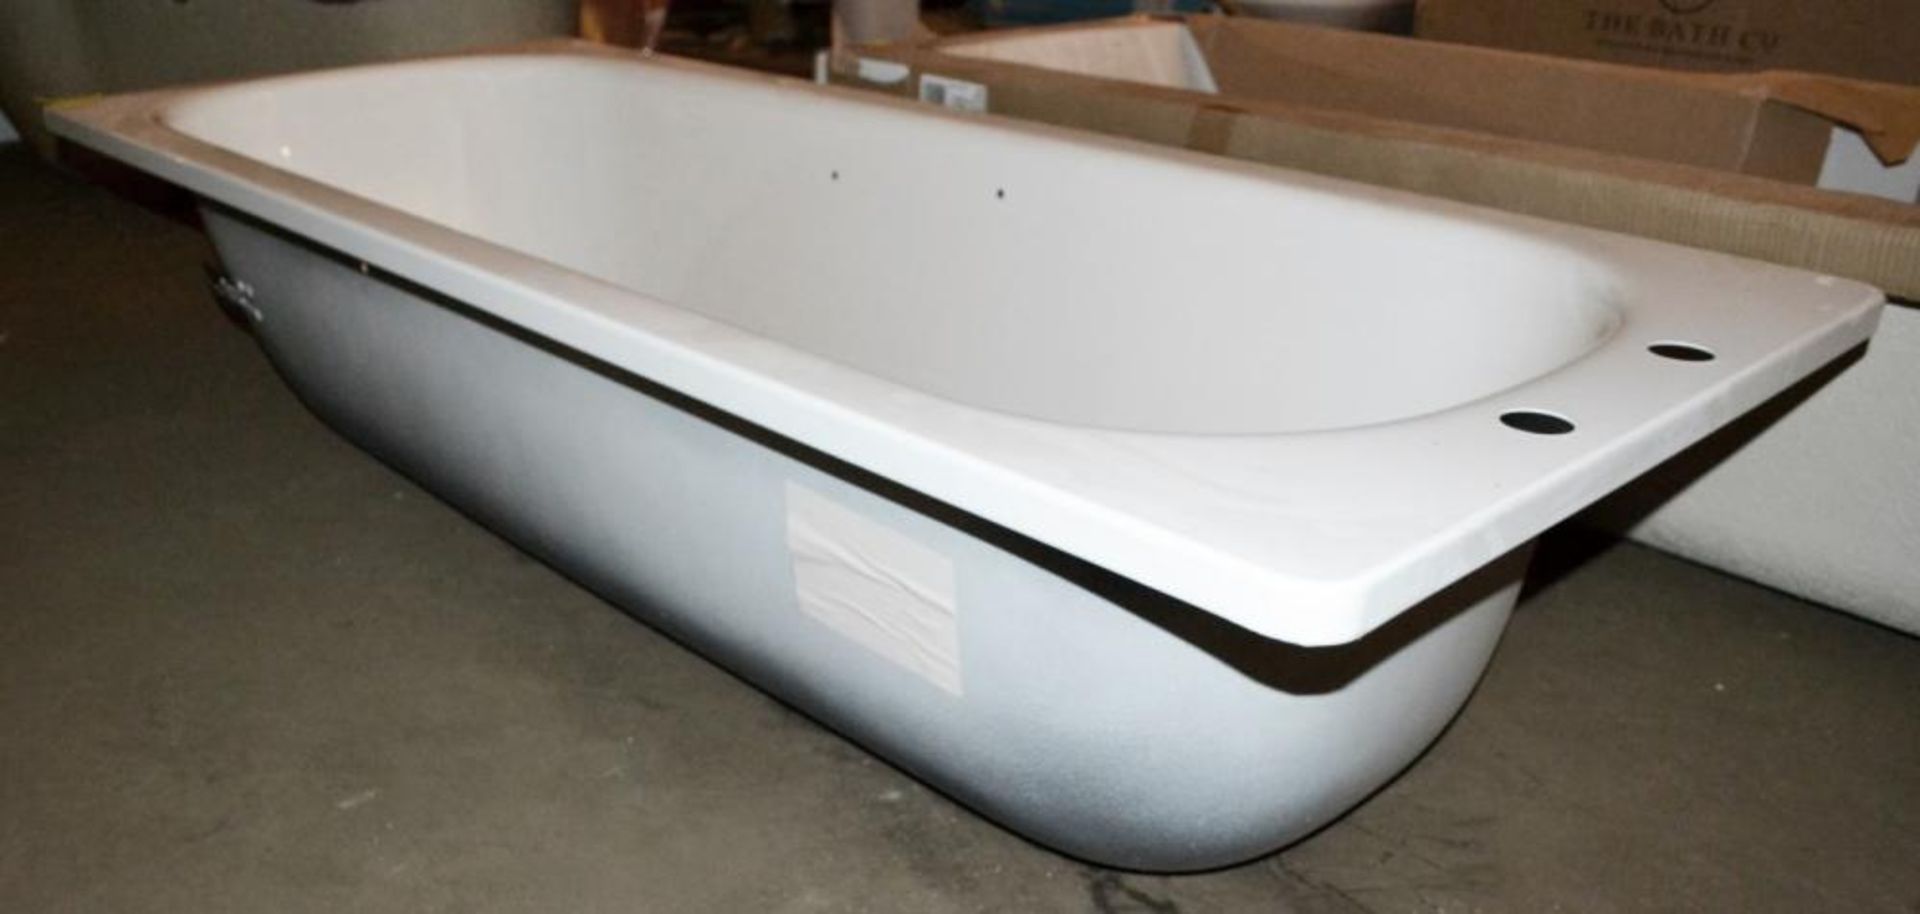 1 x Steel Bath With White Enamel Coating - Features 2 Tap Holes - Includes Box Of Fittings - New / U - Image 2 of 4